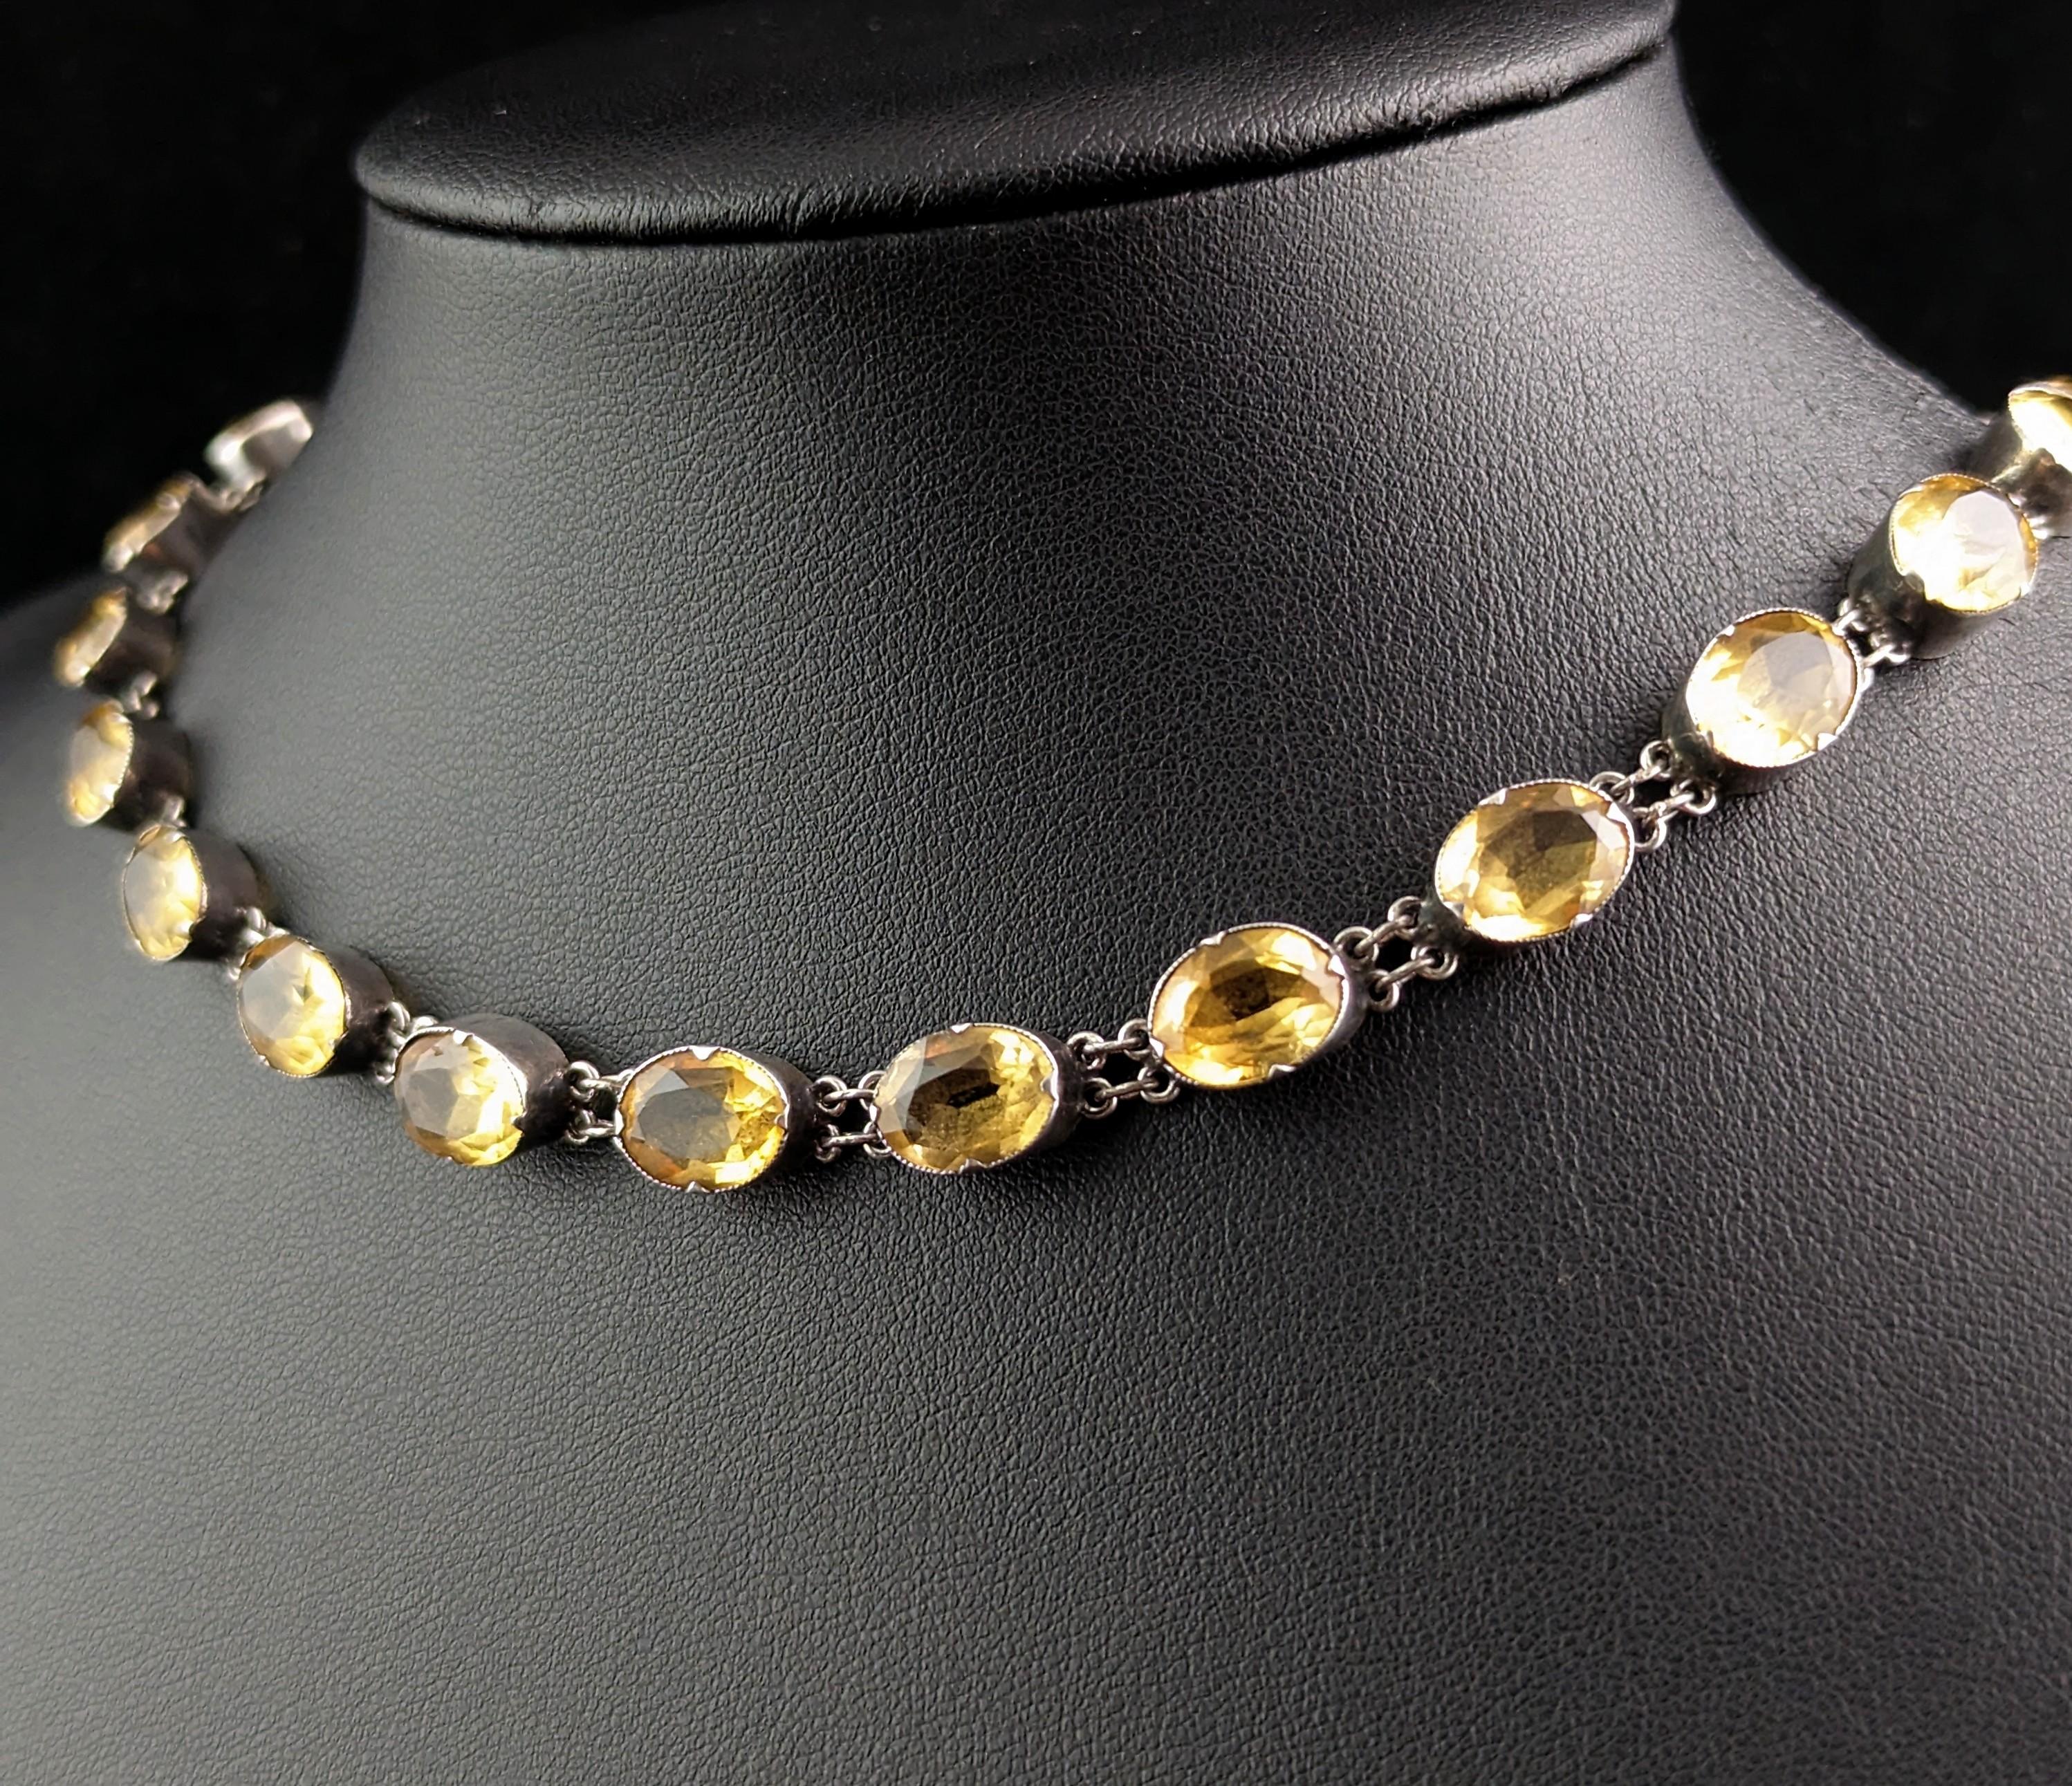 Oval Cut Antique Georgian Citrine Riviere Necklace, Sterling Silver